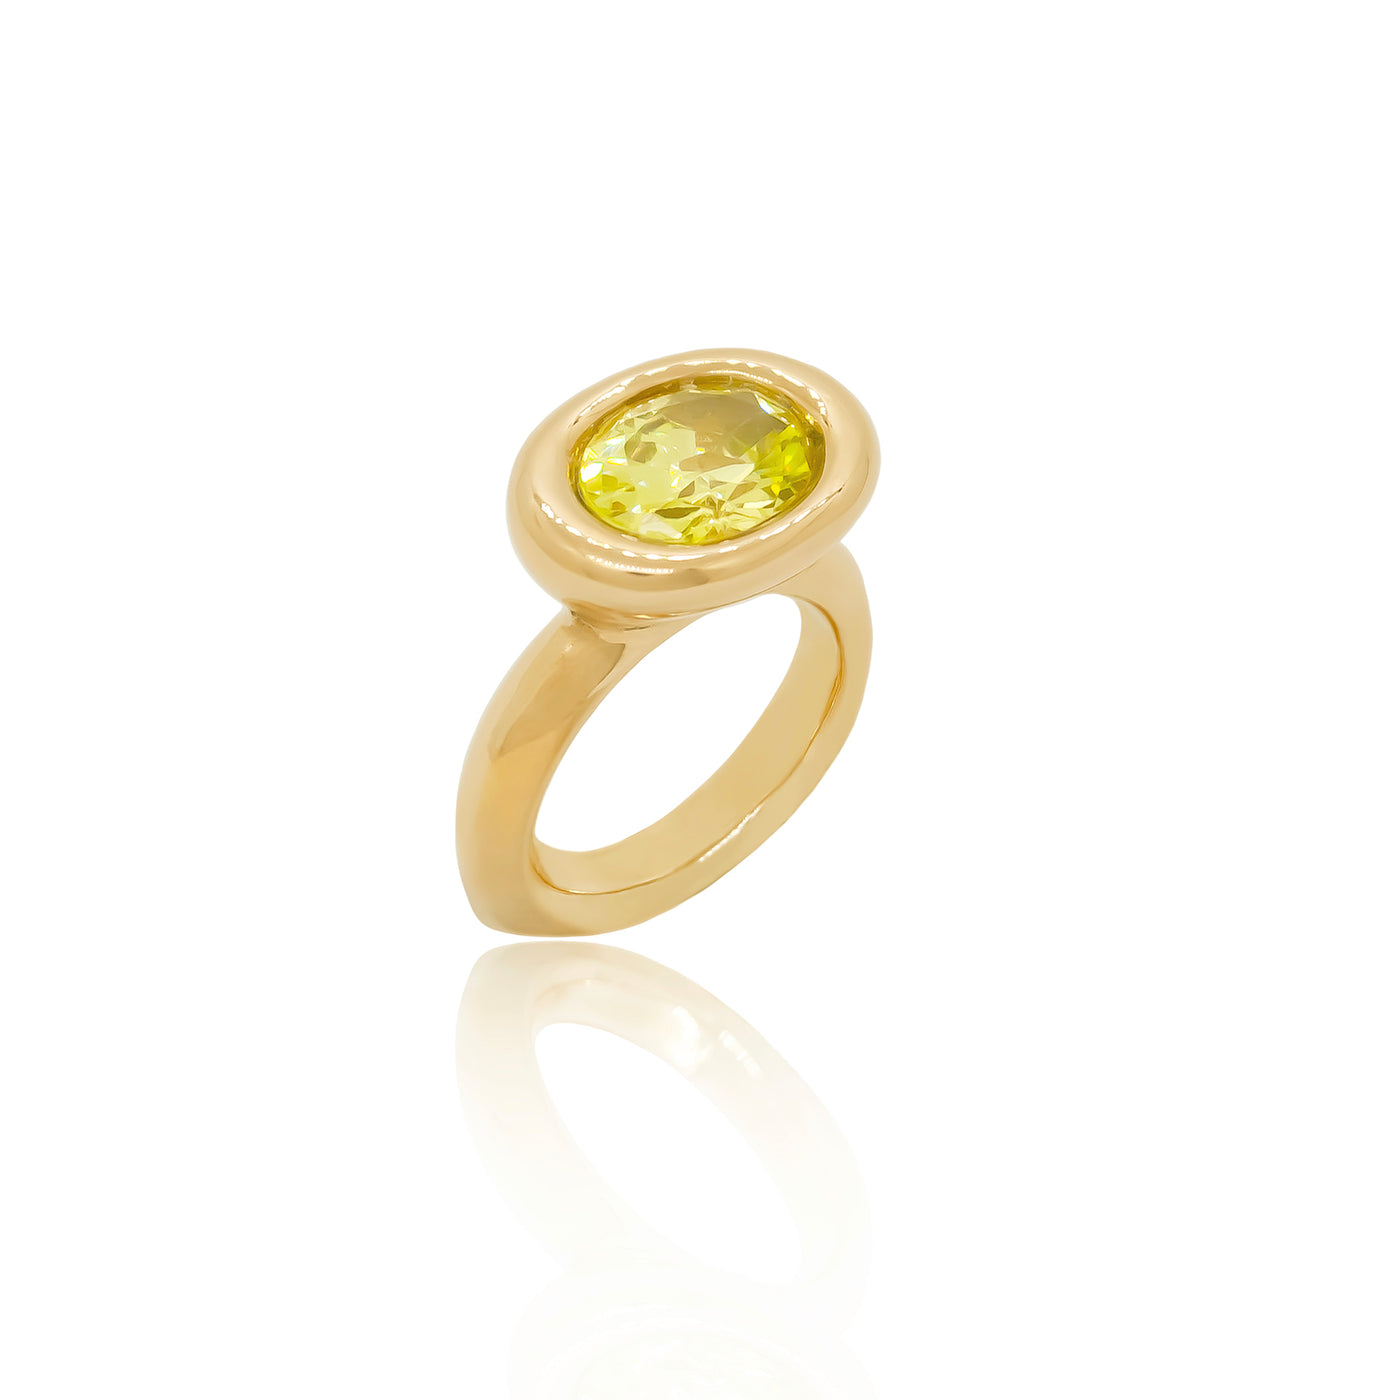 Gold solitaire cocktail ring with peridot from Atelier ORMAN